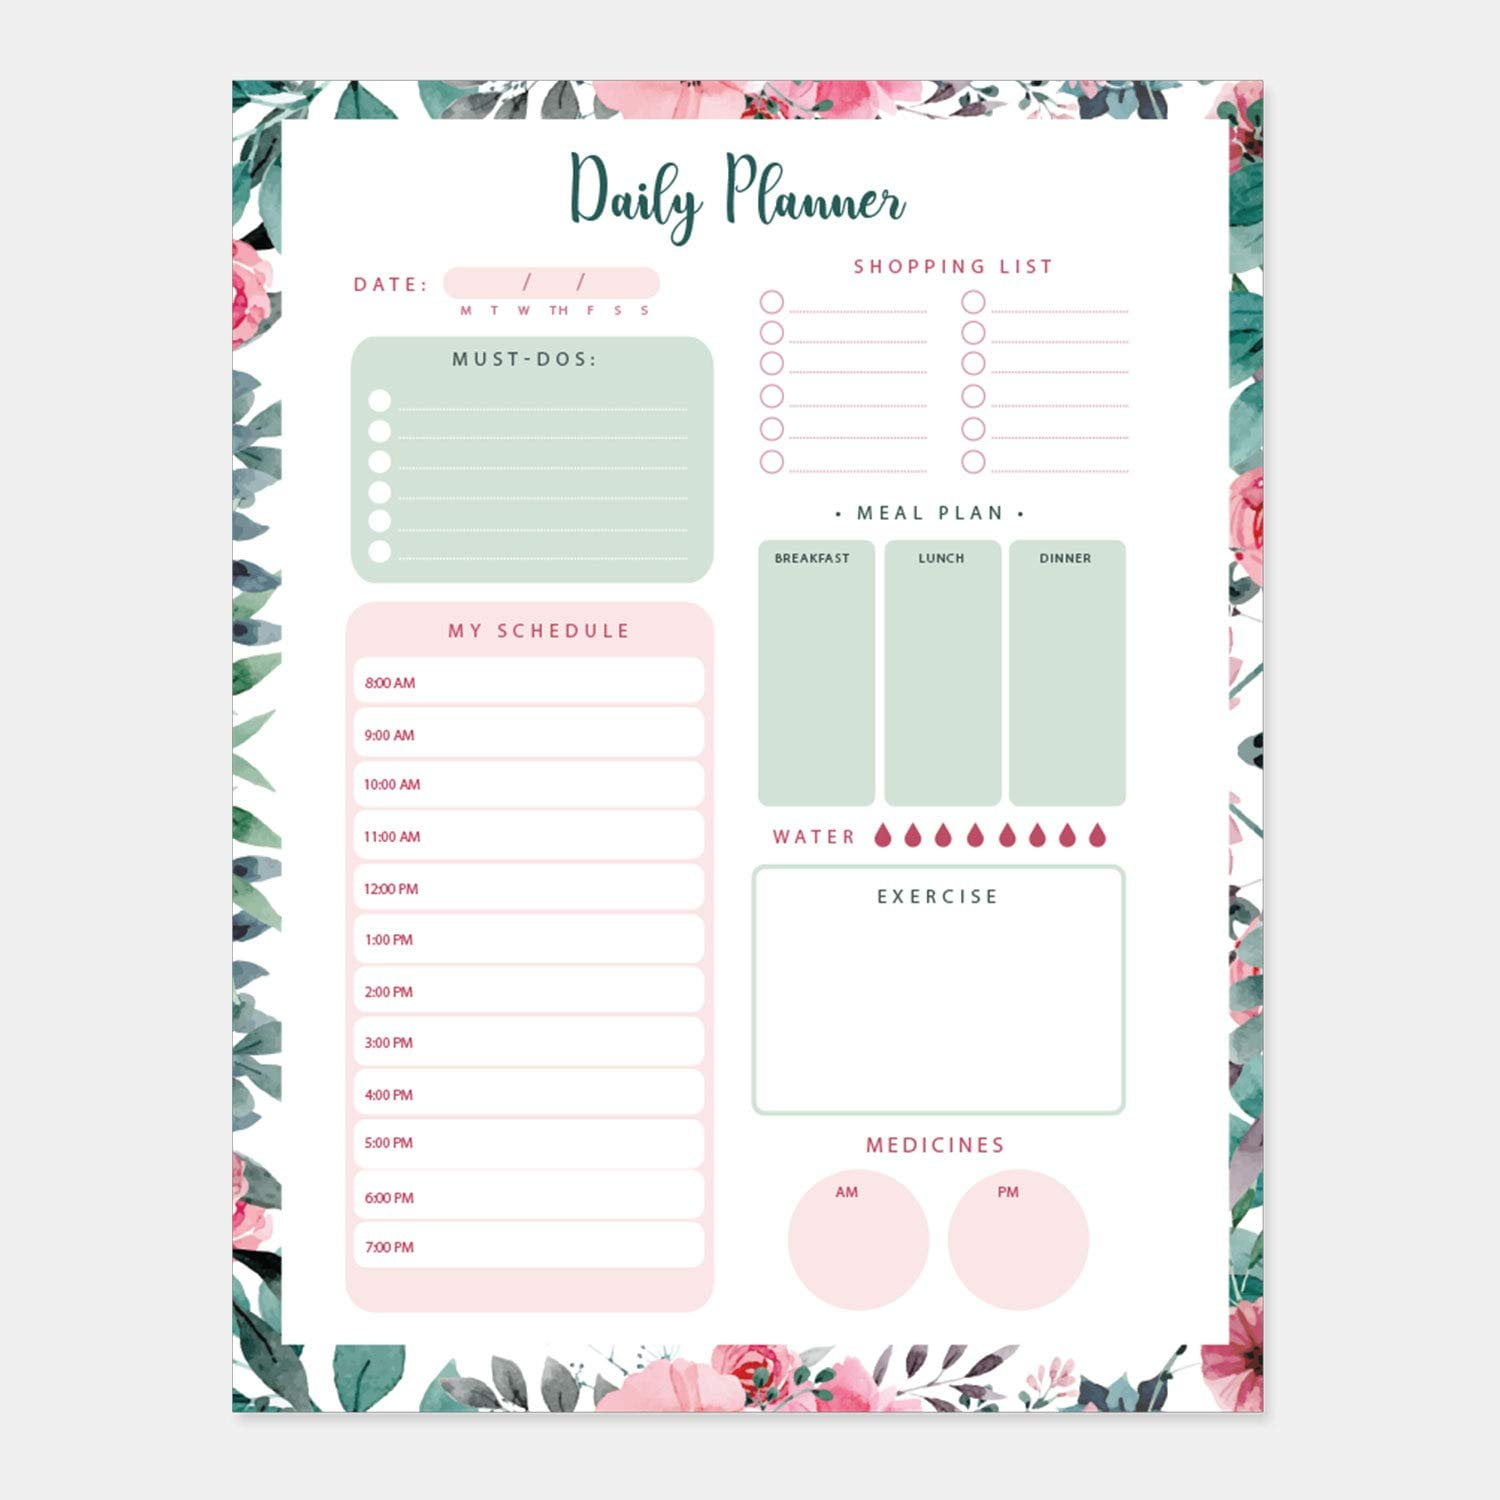 Daily Planner Examples